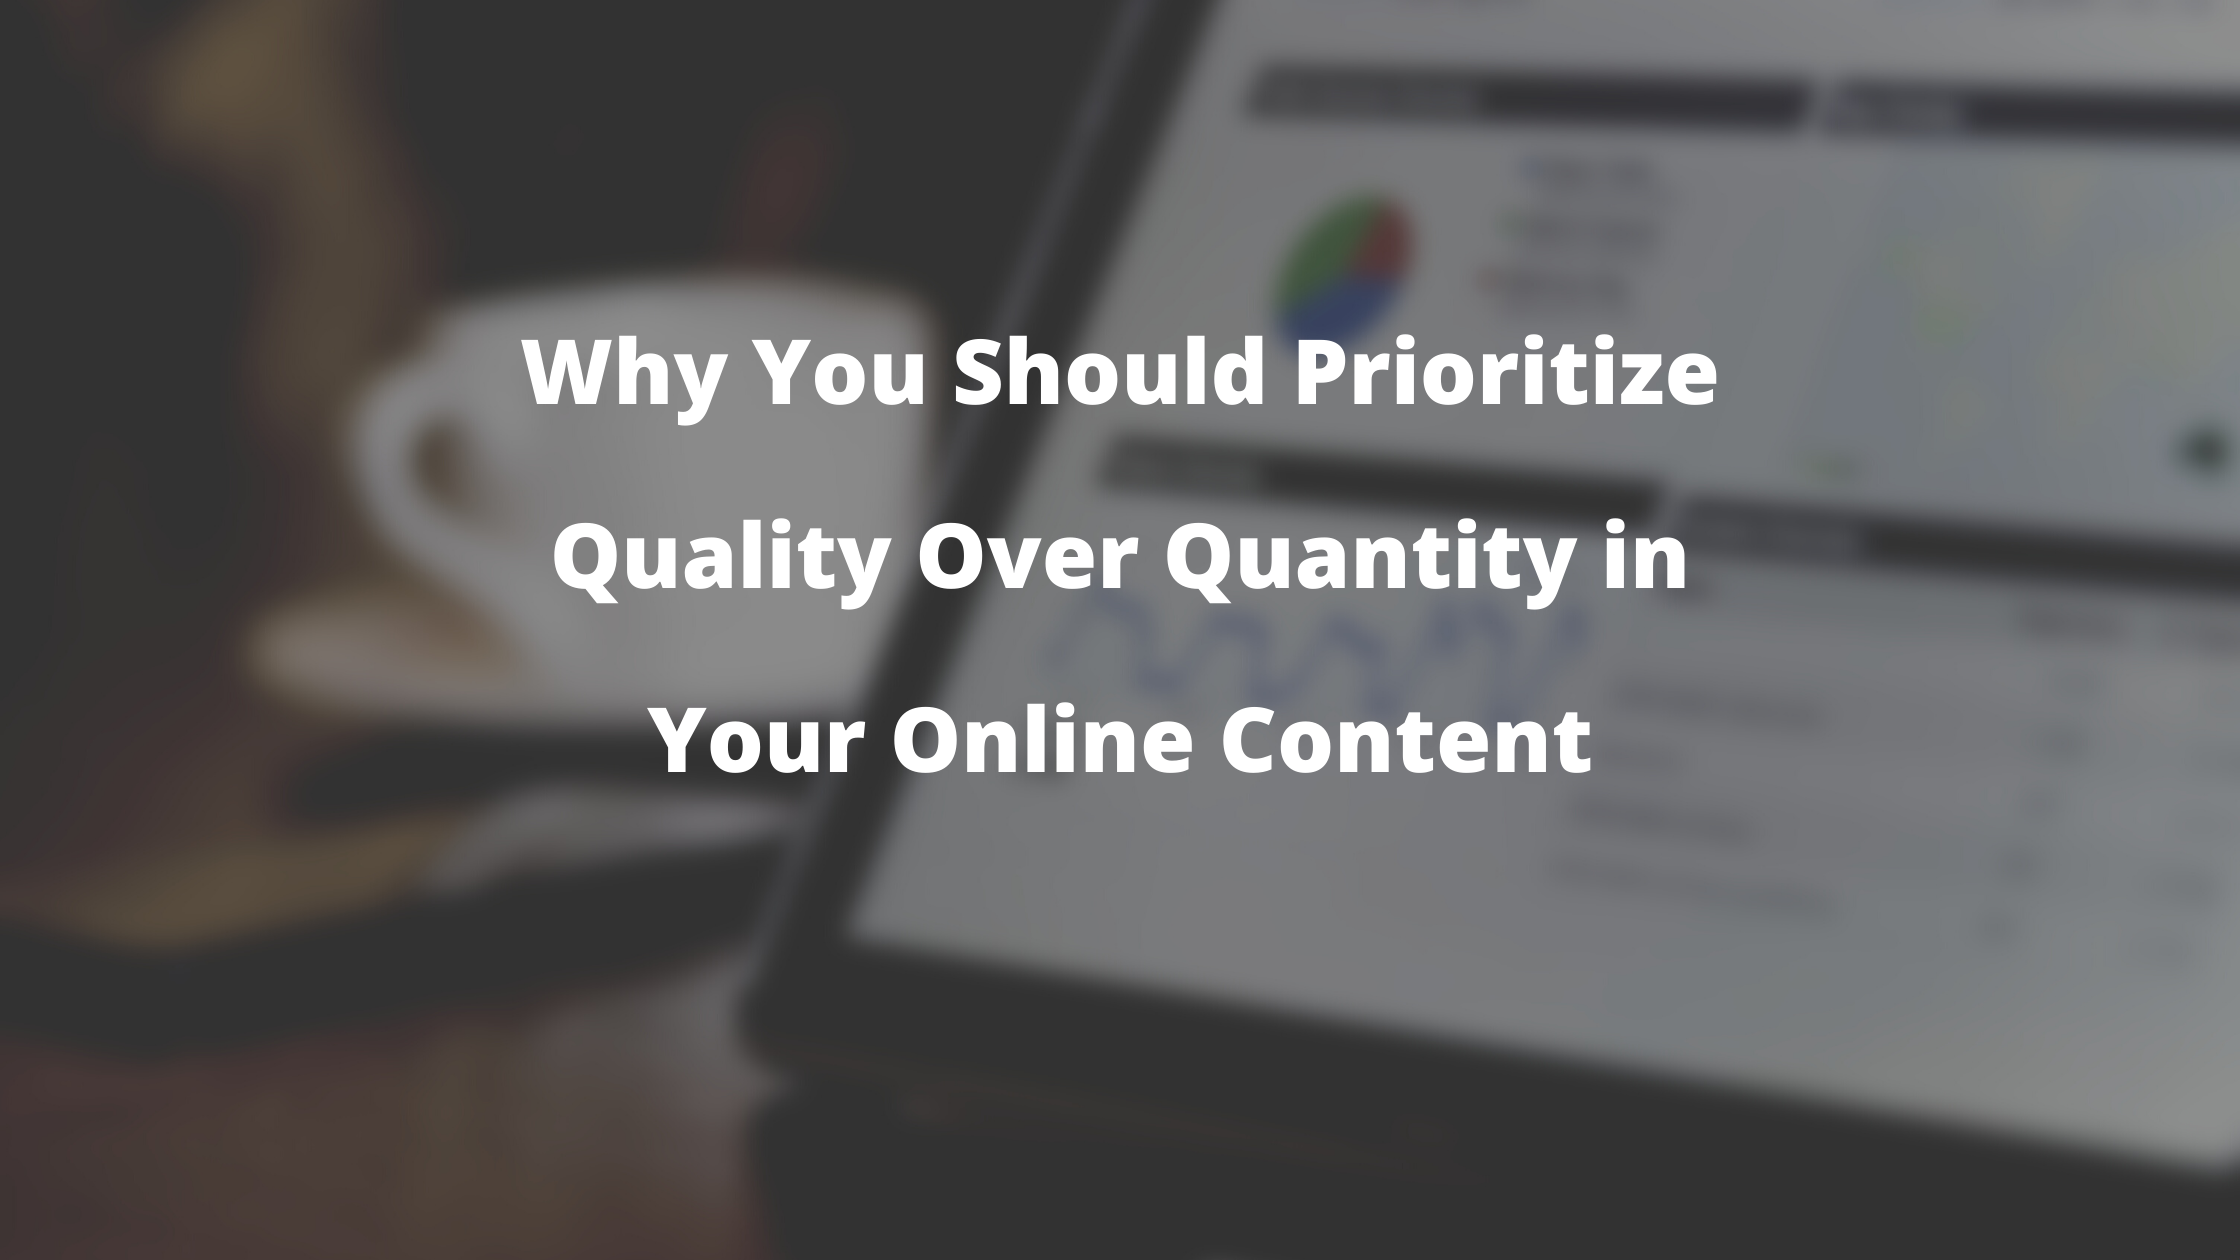 Why You Should Prioritize Quality Over Quantity in Your Online Content